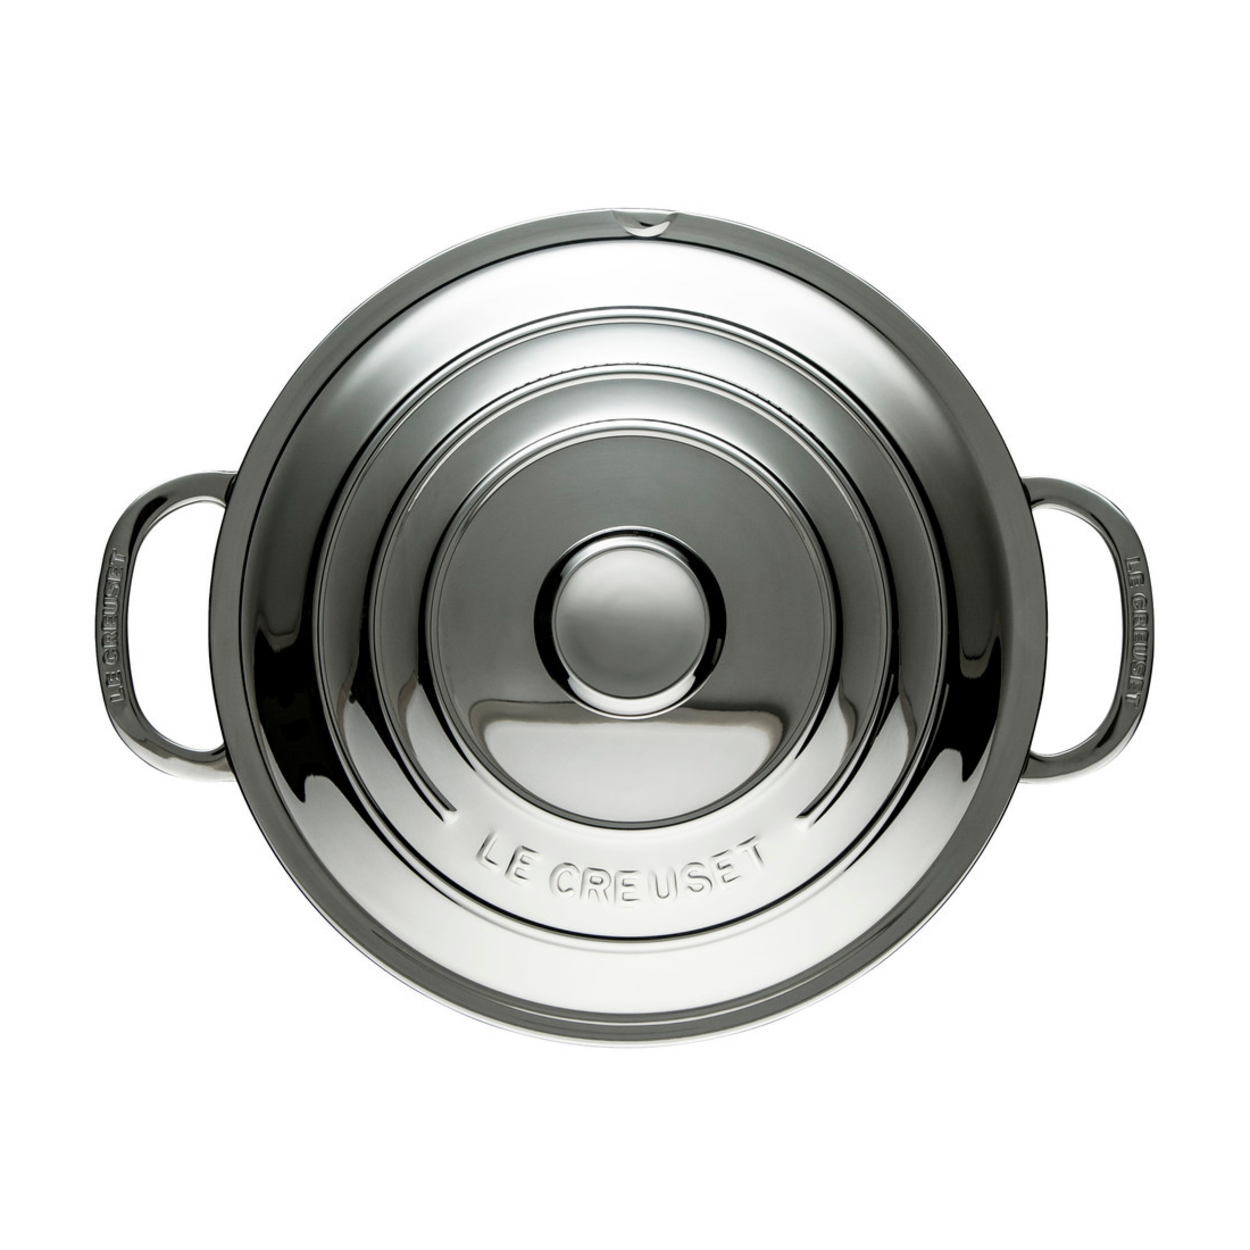 Le Creuset Stainless Steel Measuring Cups